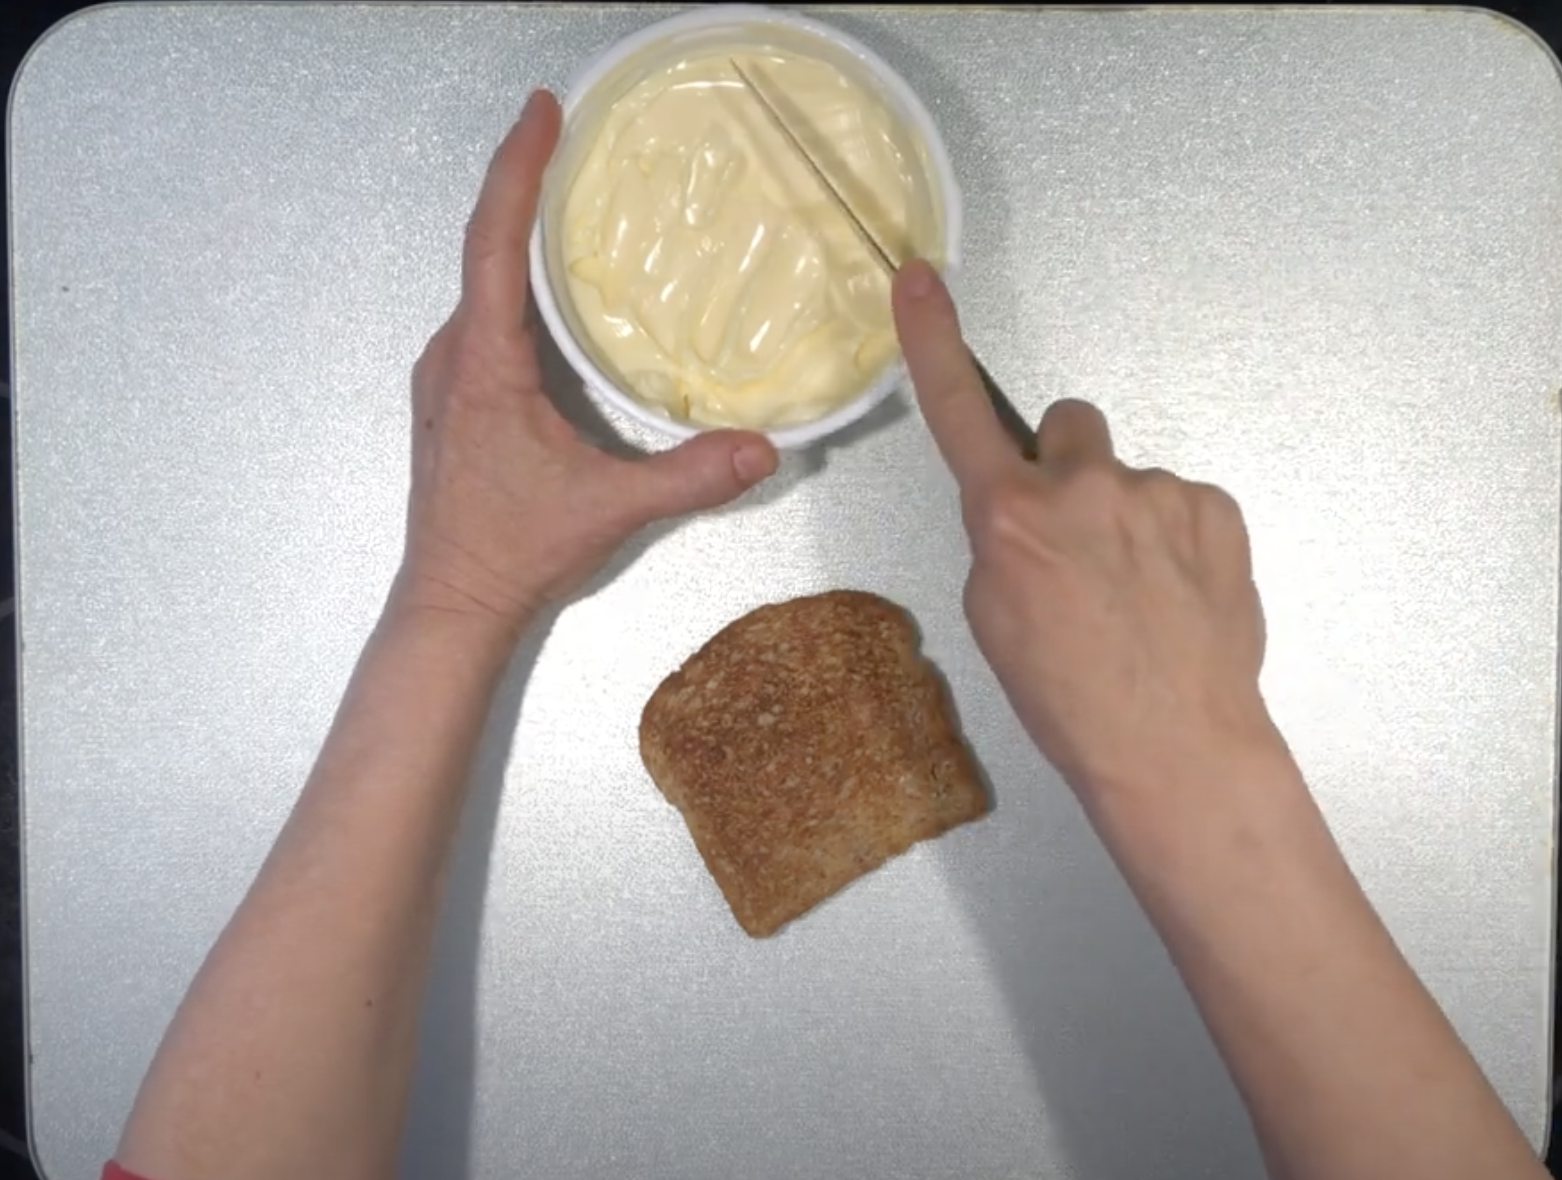 Left hand holding tub of mayonnaise and right hand placing knife in tub with piece of toast in foreground